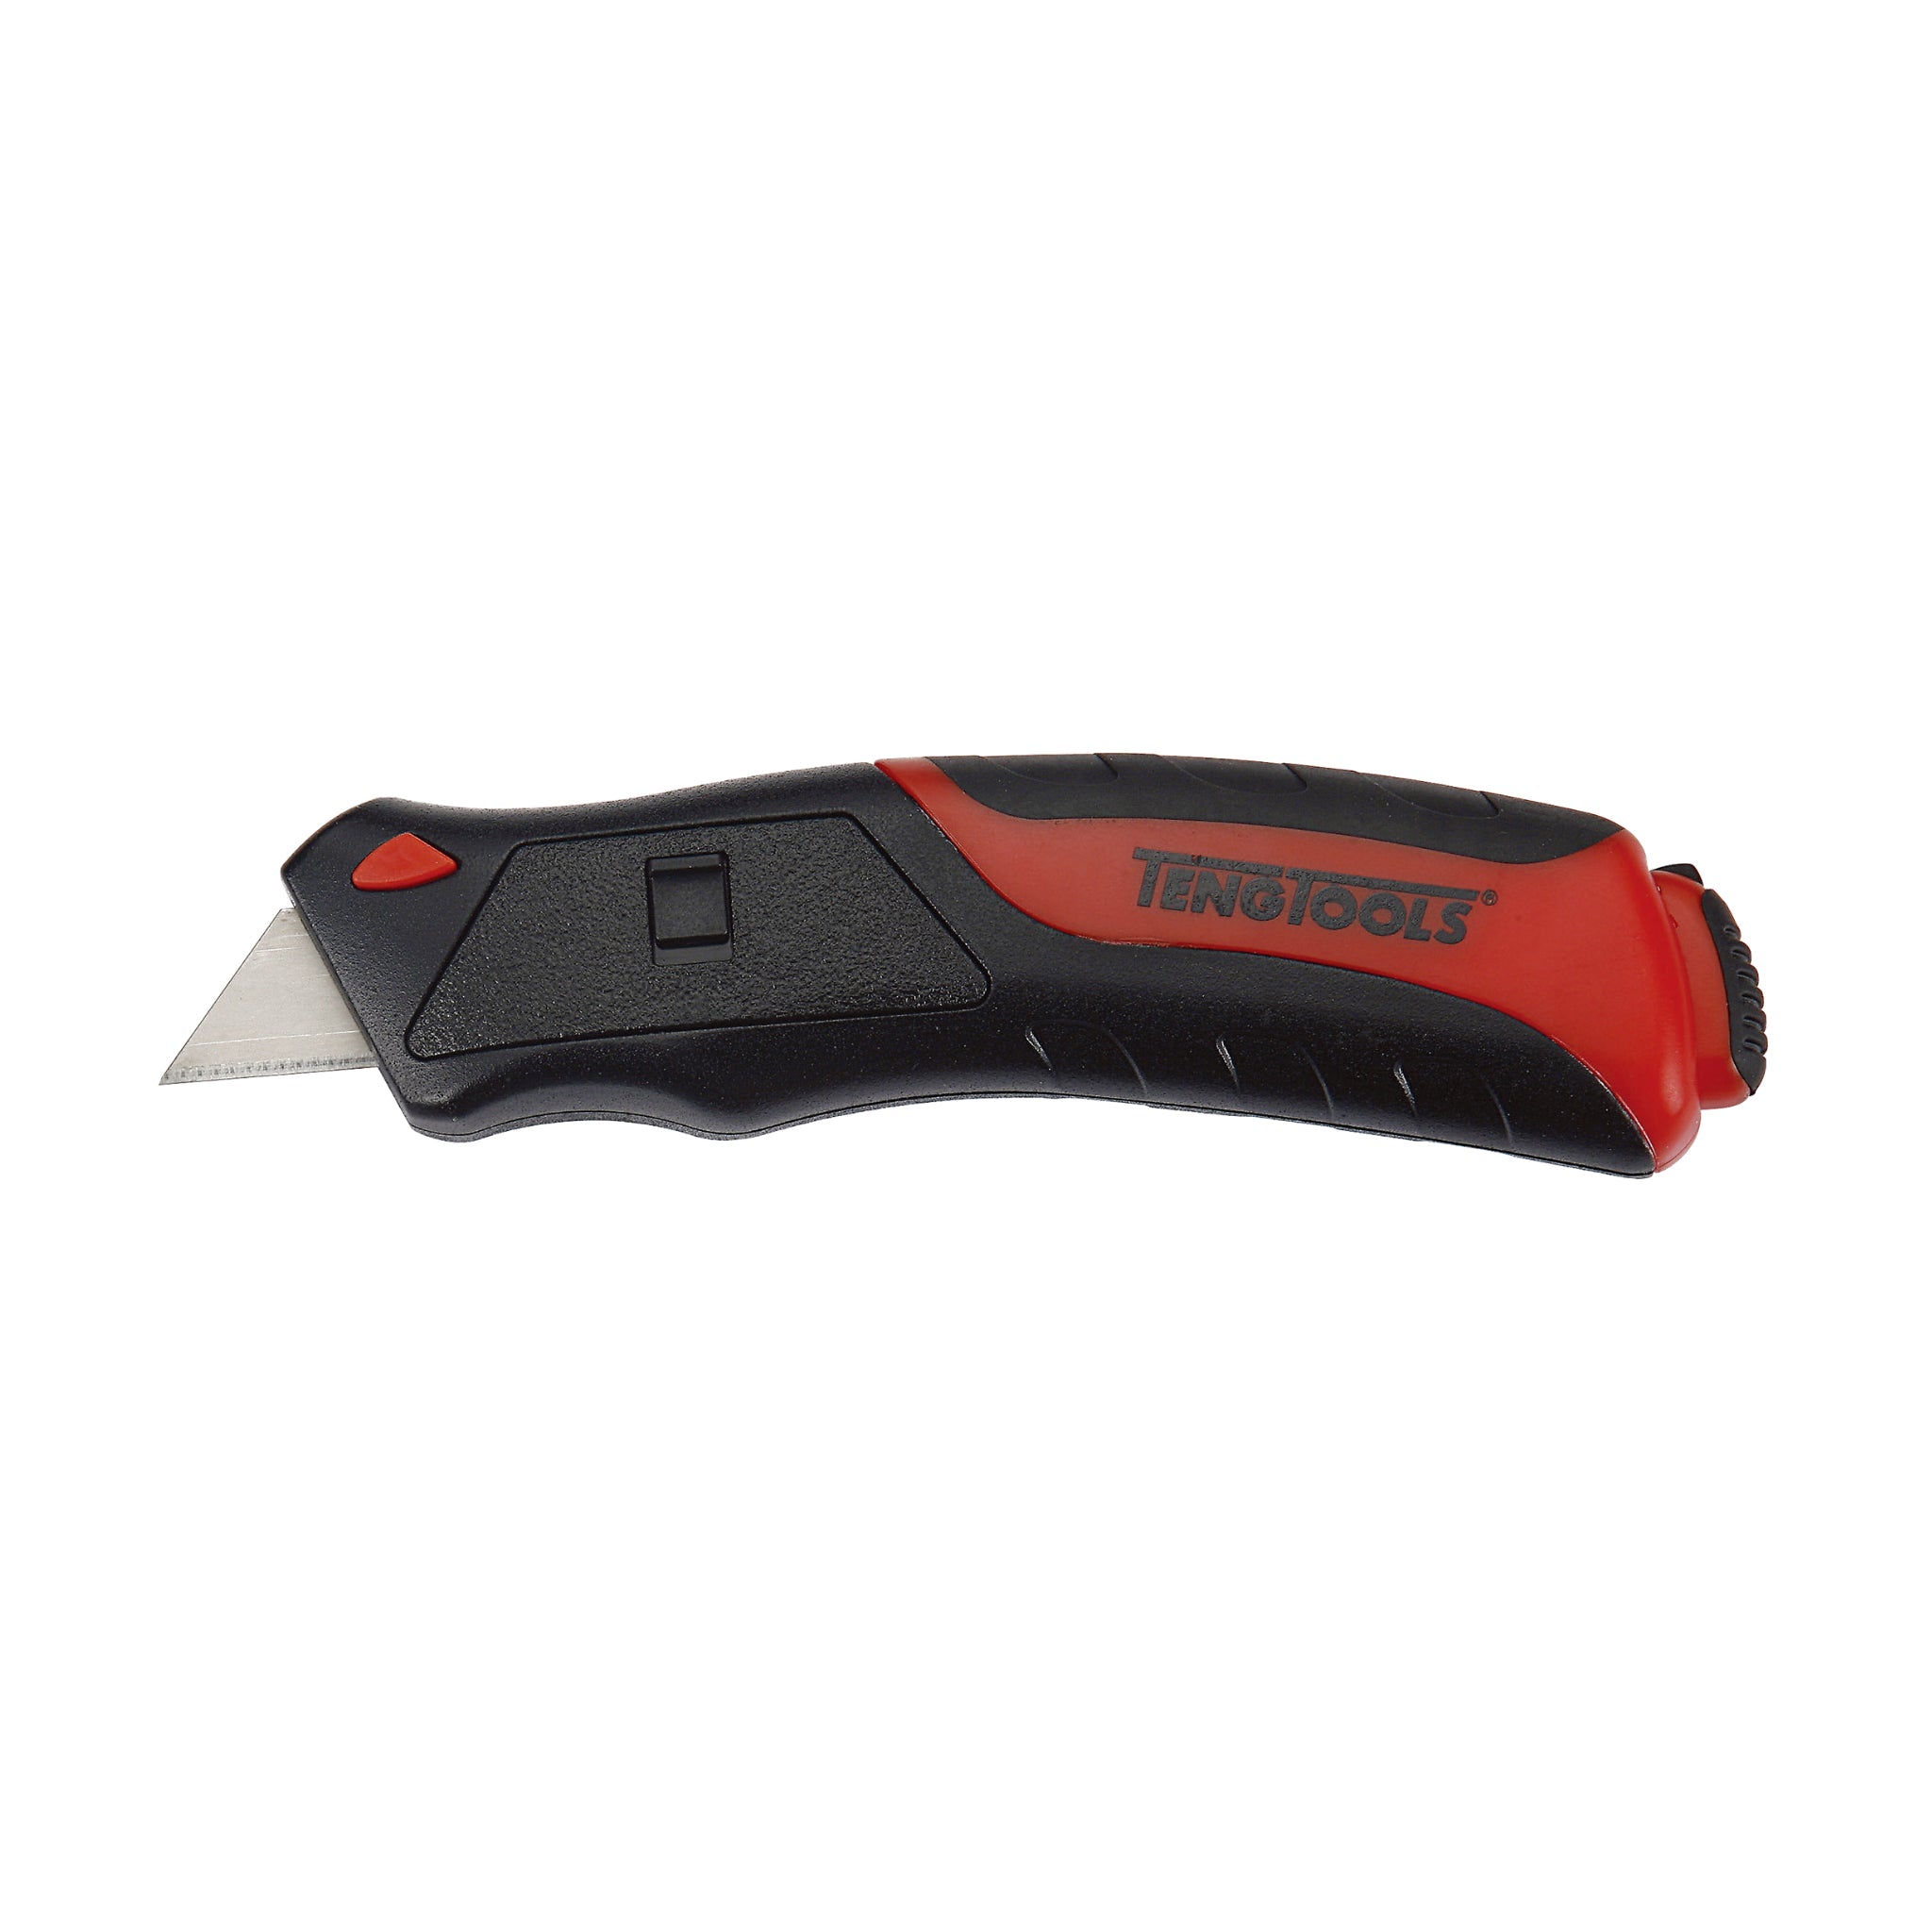 Teng Tools Non-Slip Safety Utility Knife / Box Cutters with Retractable  Blade - 711 - Tool66 Cutting Tools